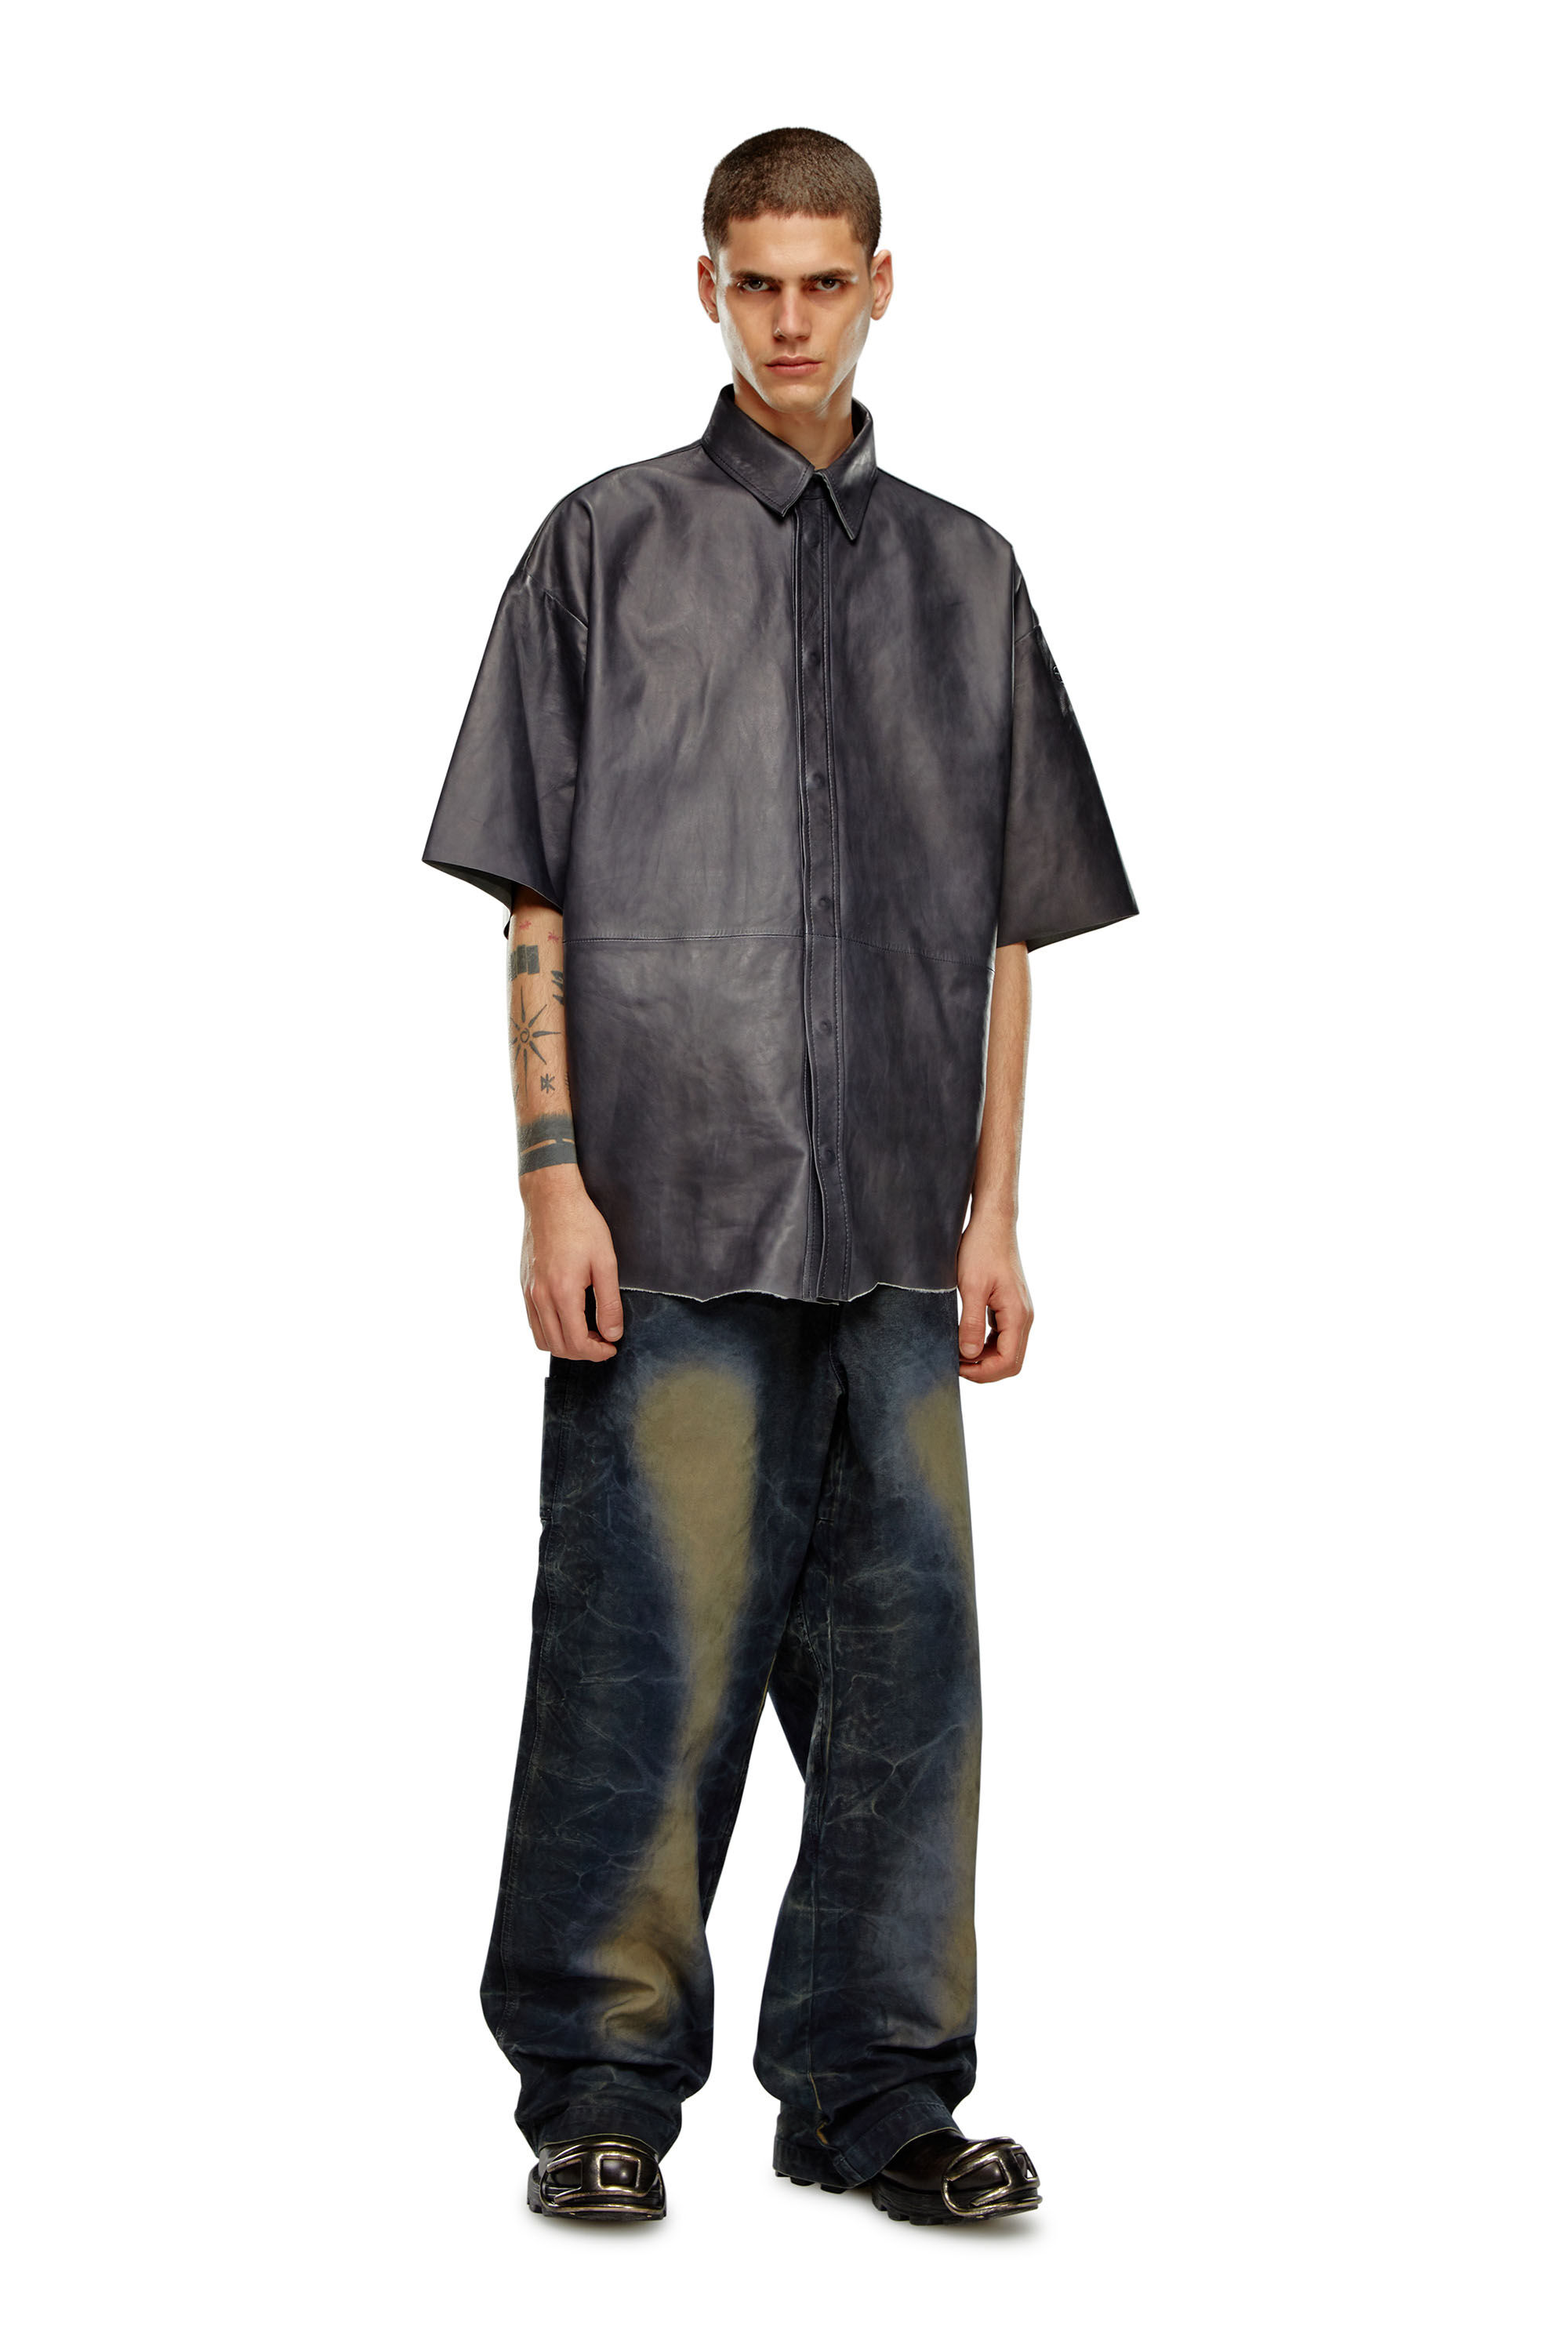 Diesel - S-EMIN-LTH, Man Oversized shirt in treated leather in Black - Image 1